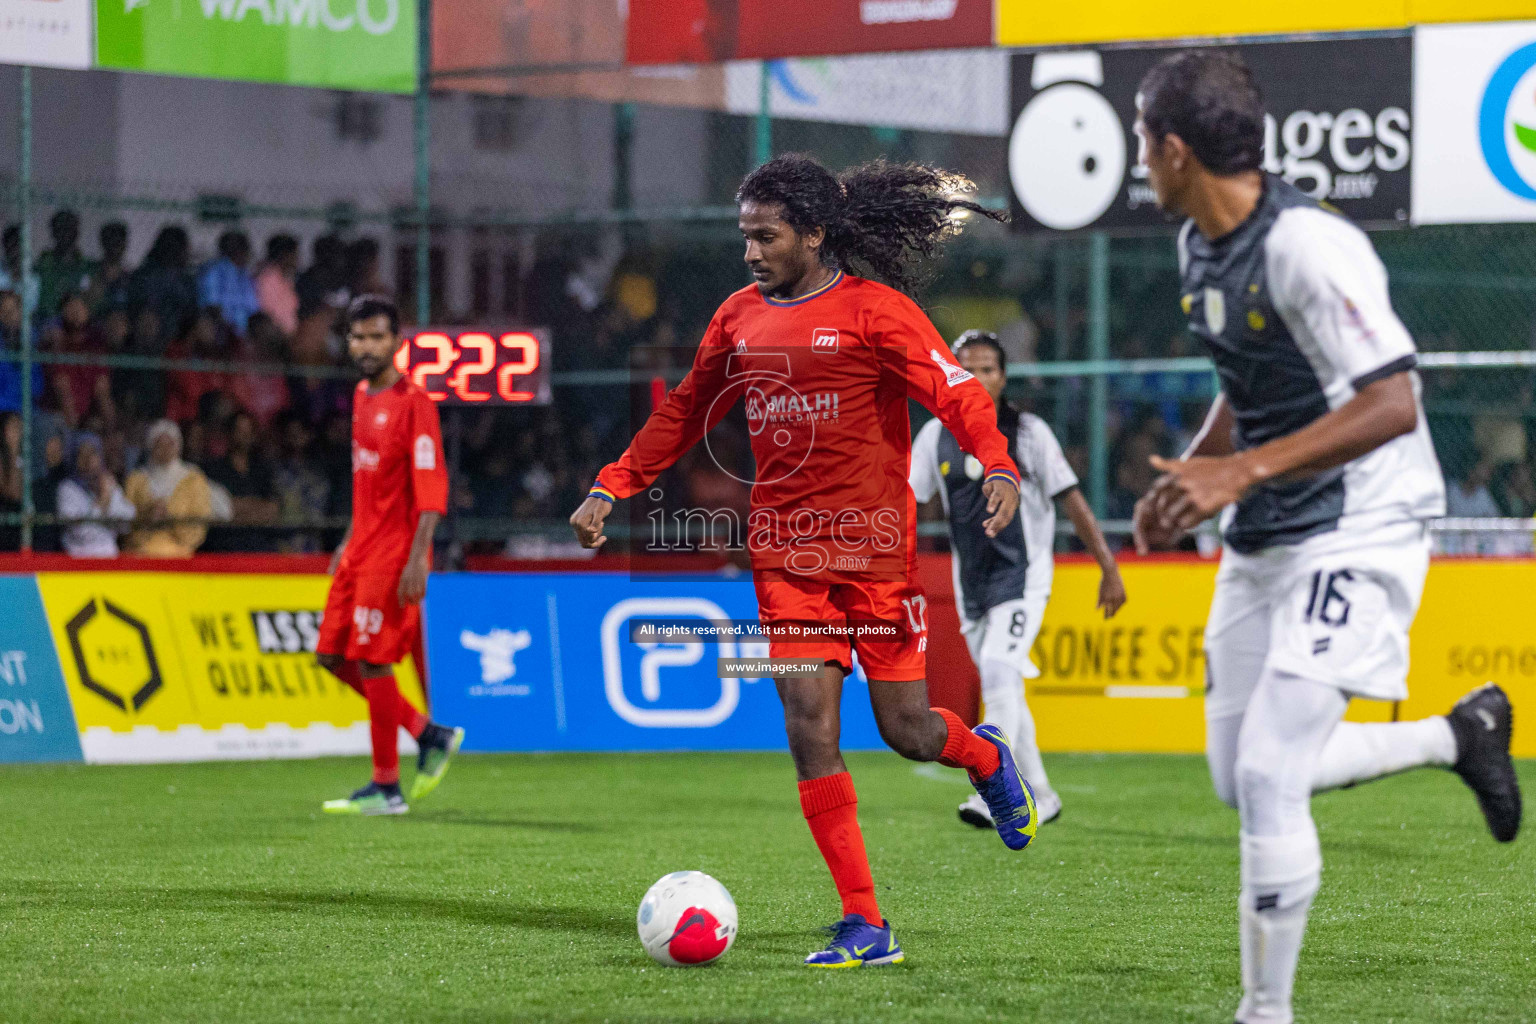 RRC vs Medianet in Club Maldives Cup 2022 was held in Hulhumale', Maldives on Wednesday, 12th October 2022. Photos: Ismail Thoriq/ images.mv